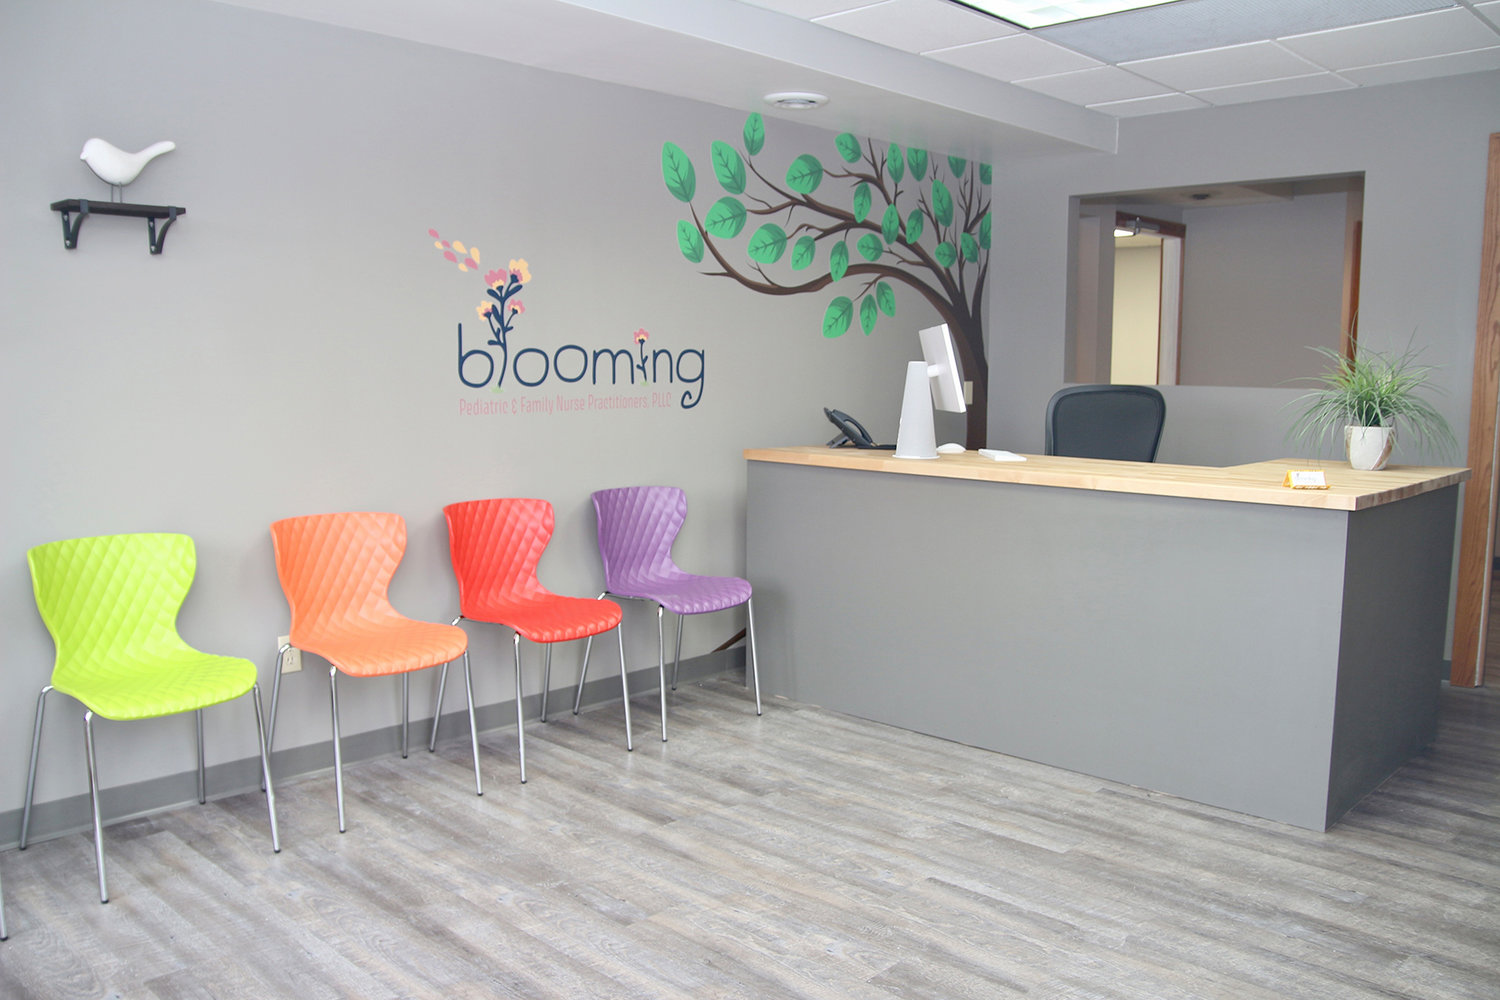 Inside Blooming Pediatrics — The new offices of the new pediatrics practice, Blooming Pediatrics, 1 Oxford Crossing, New Hartford.